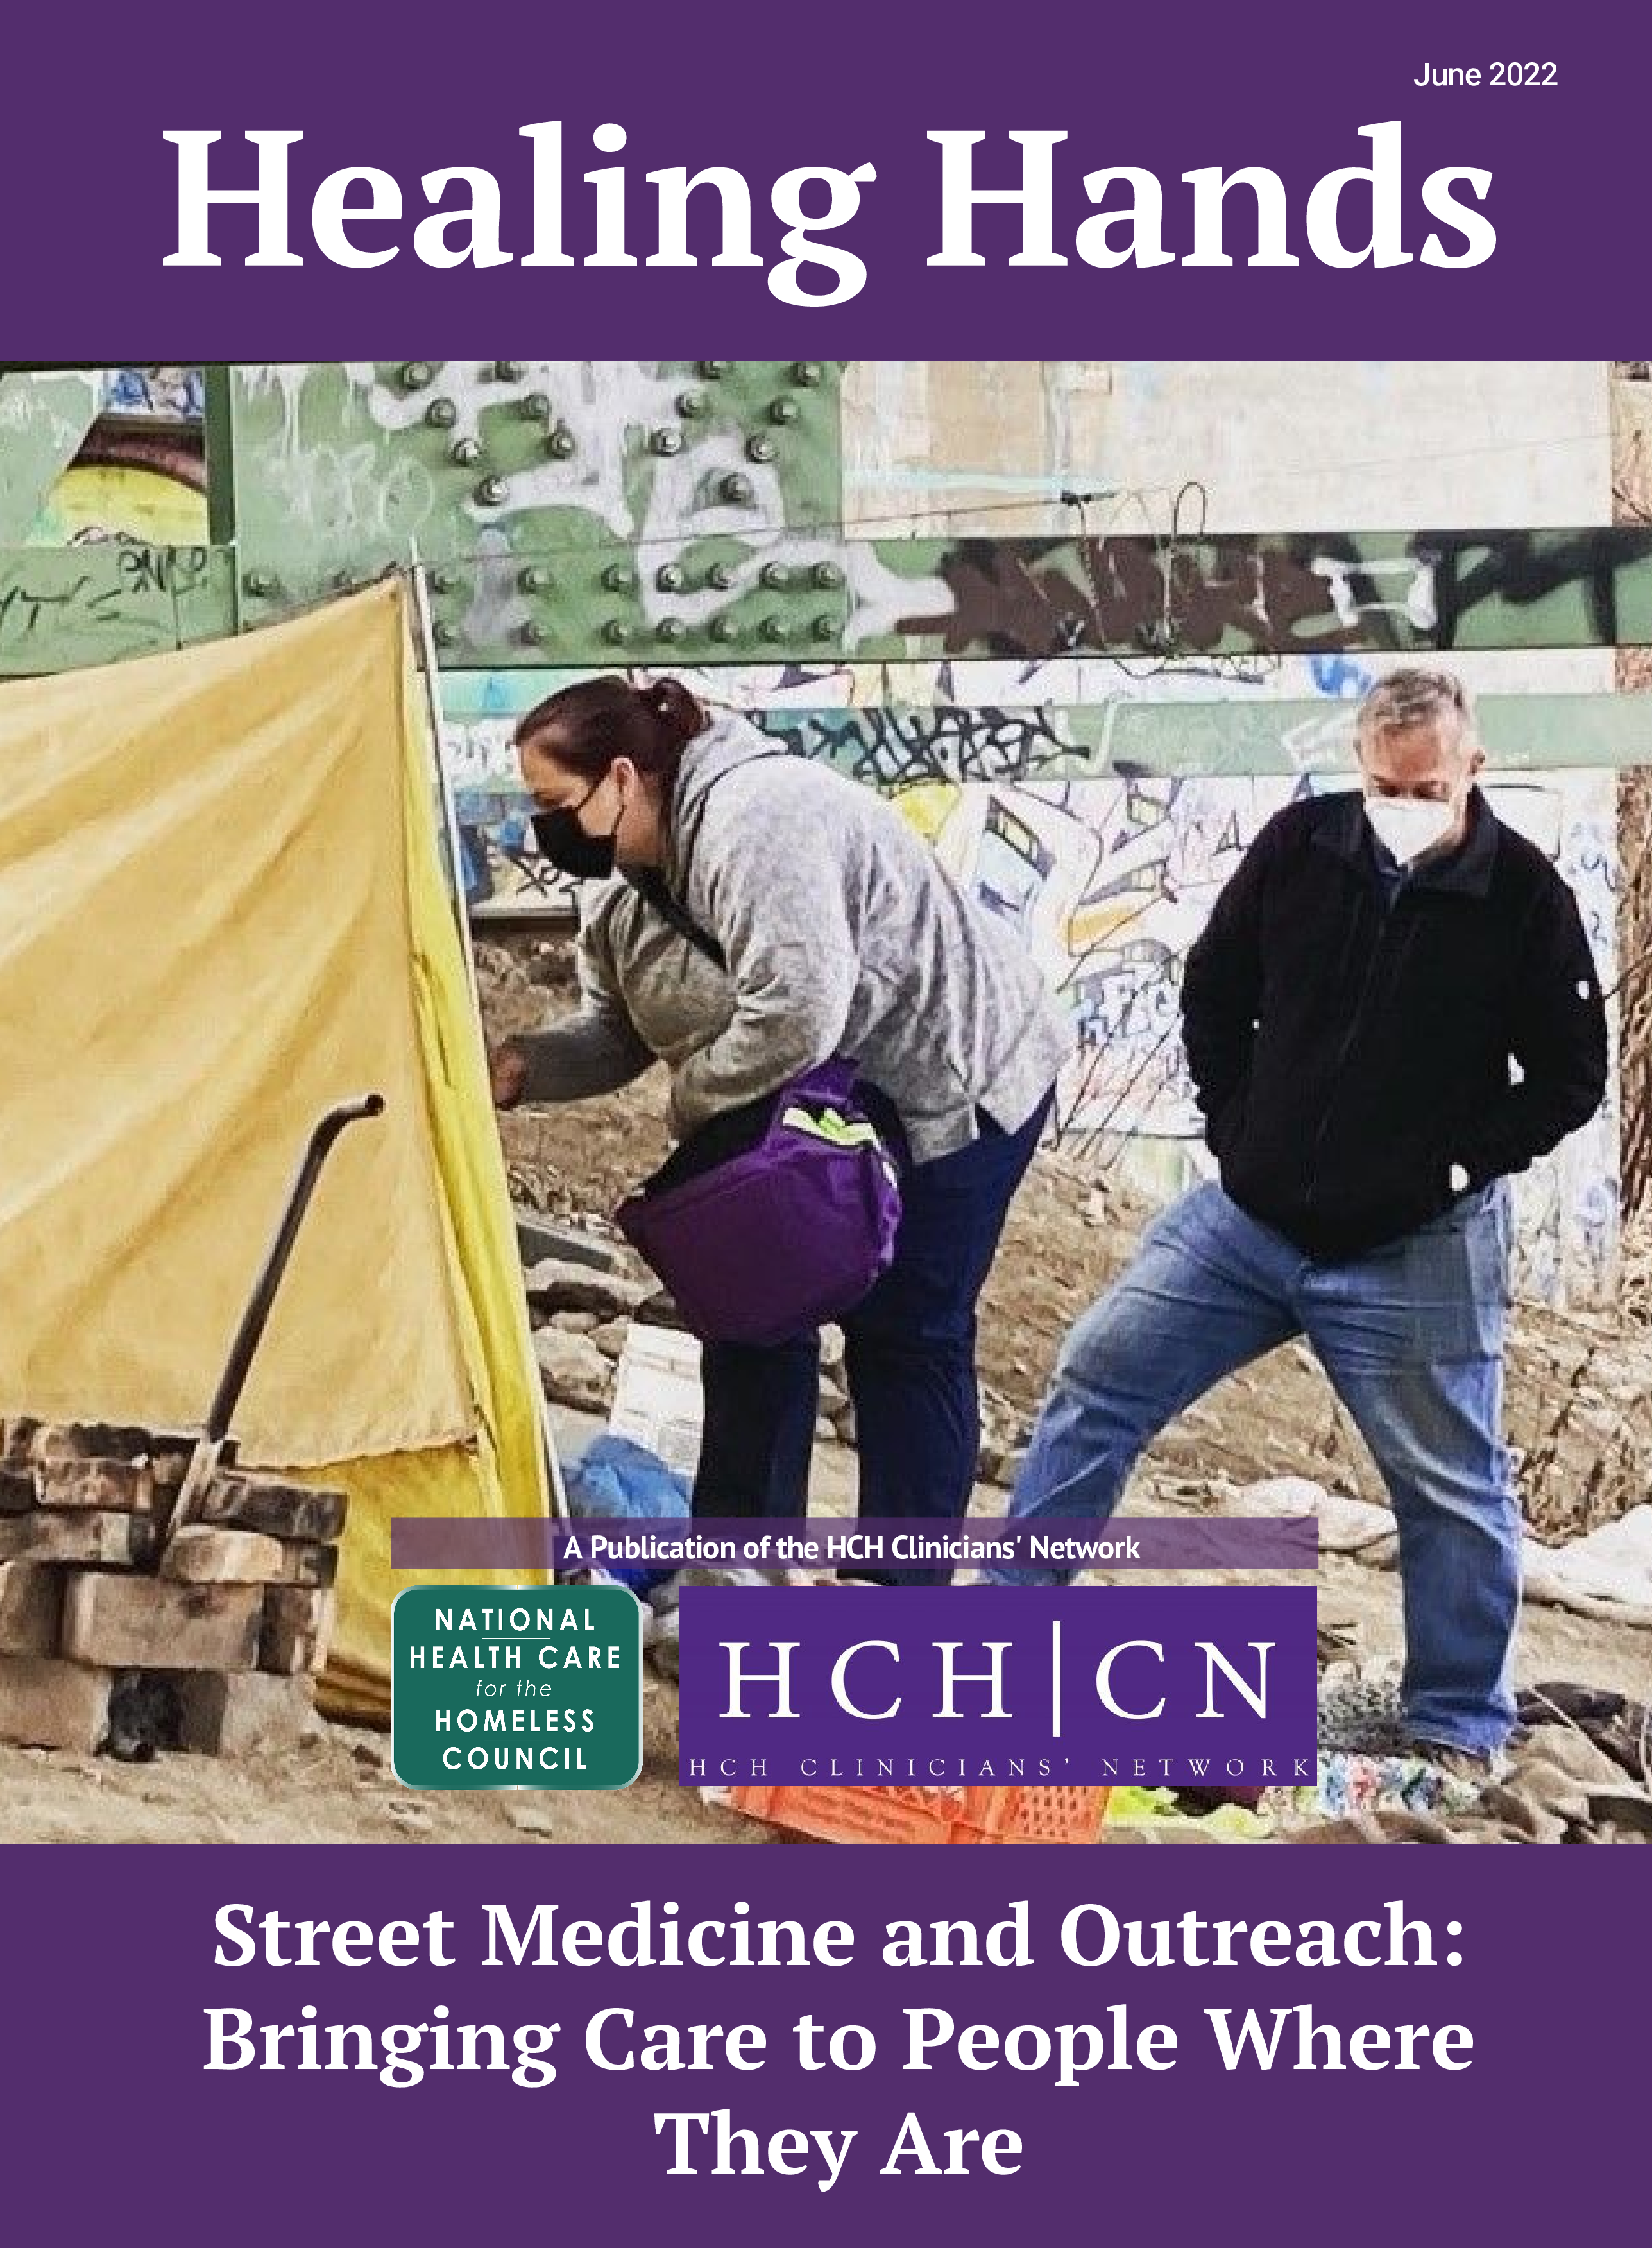 Cover image of report displays two people both wearing masks approaching a tent with an unhoused individual and offering services.